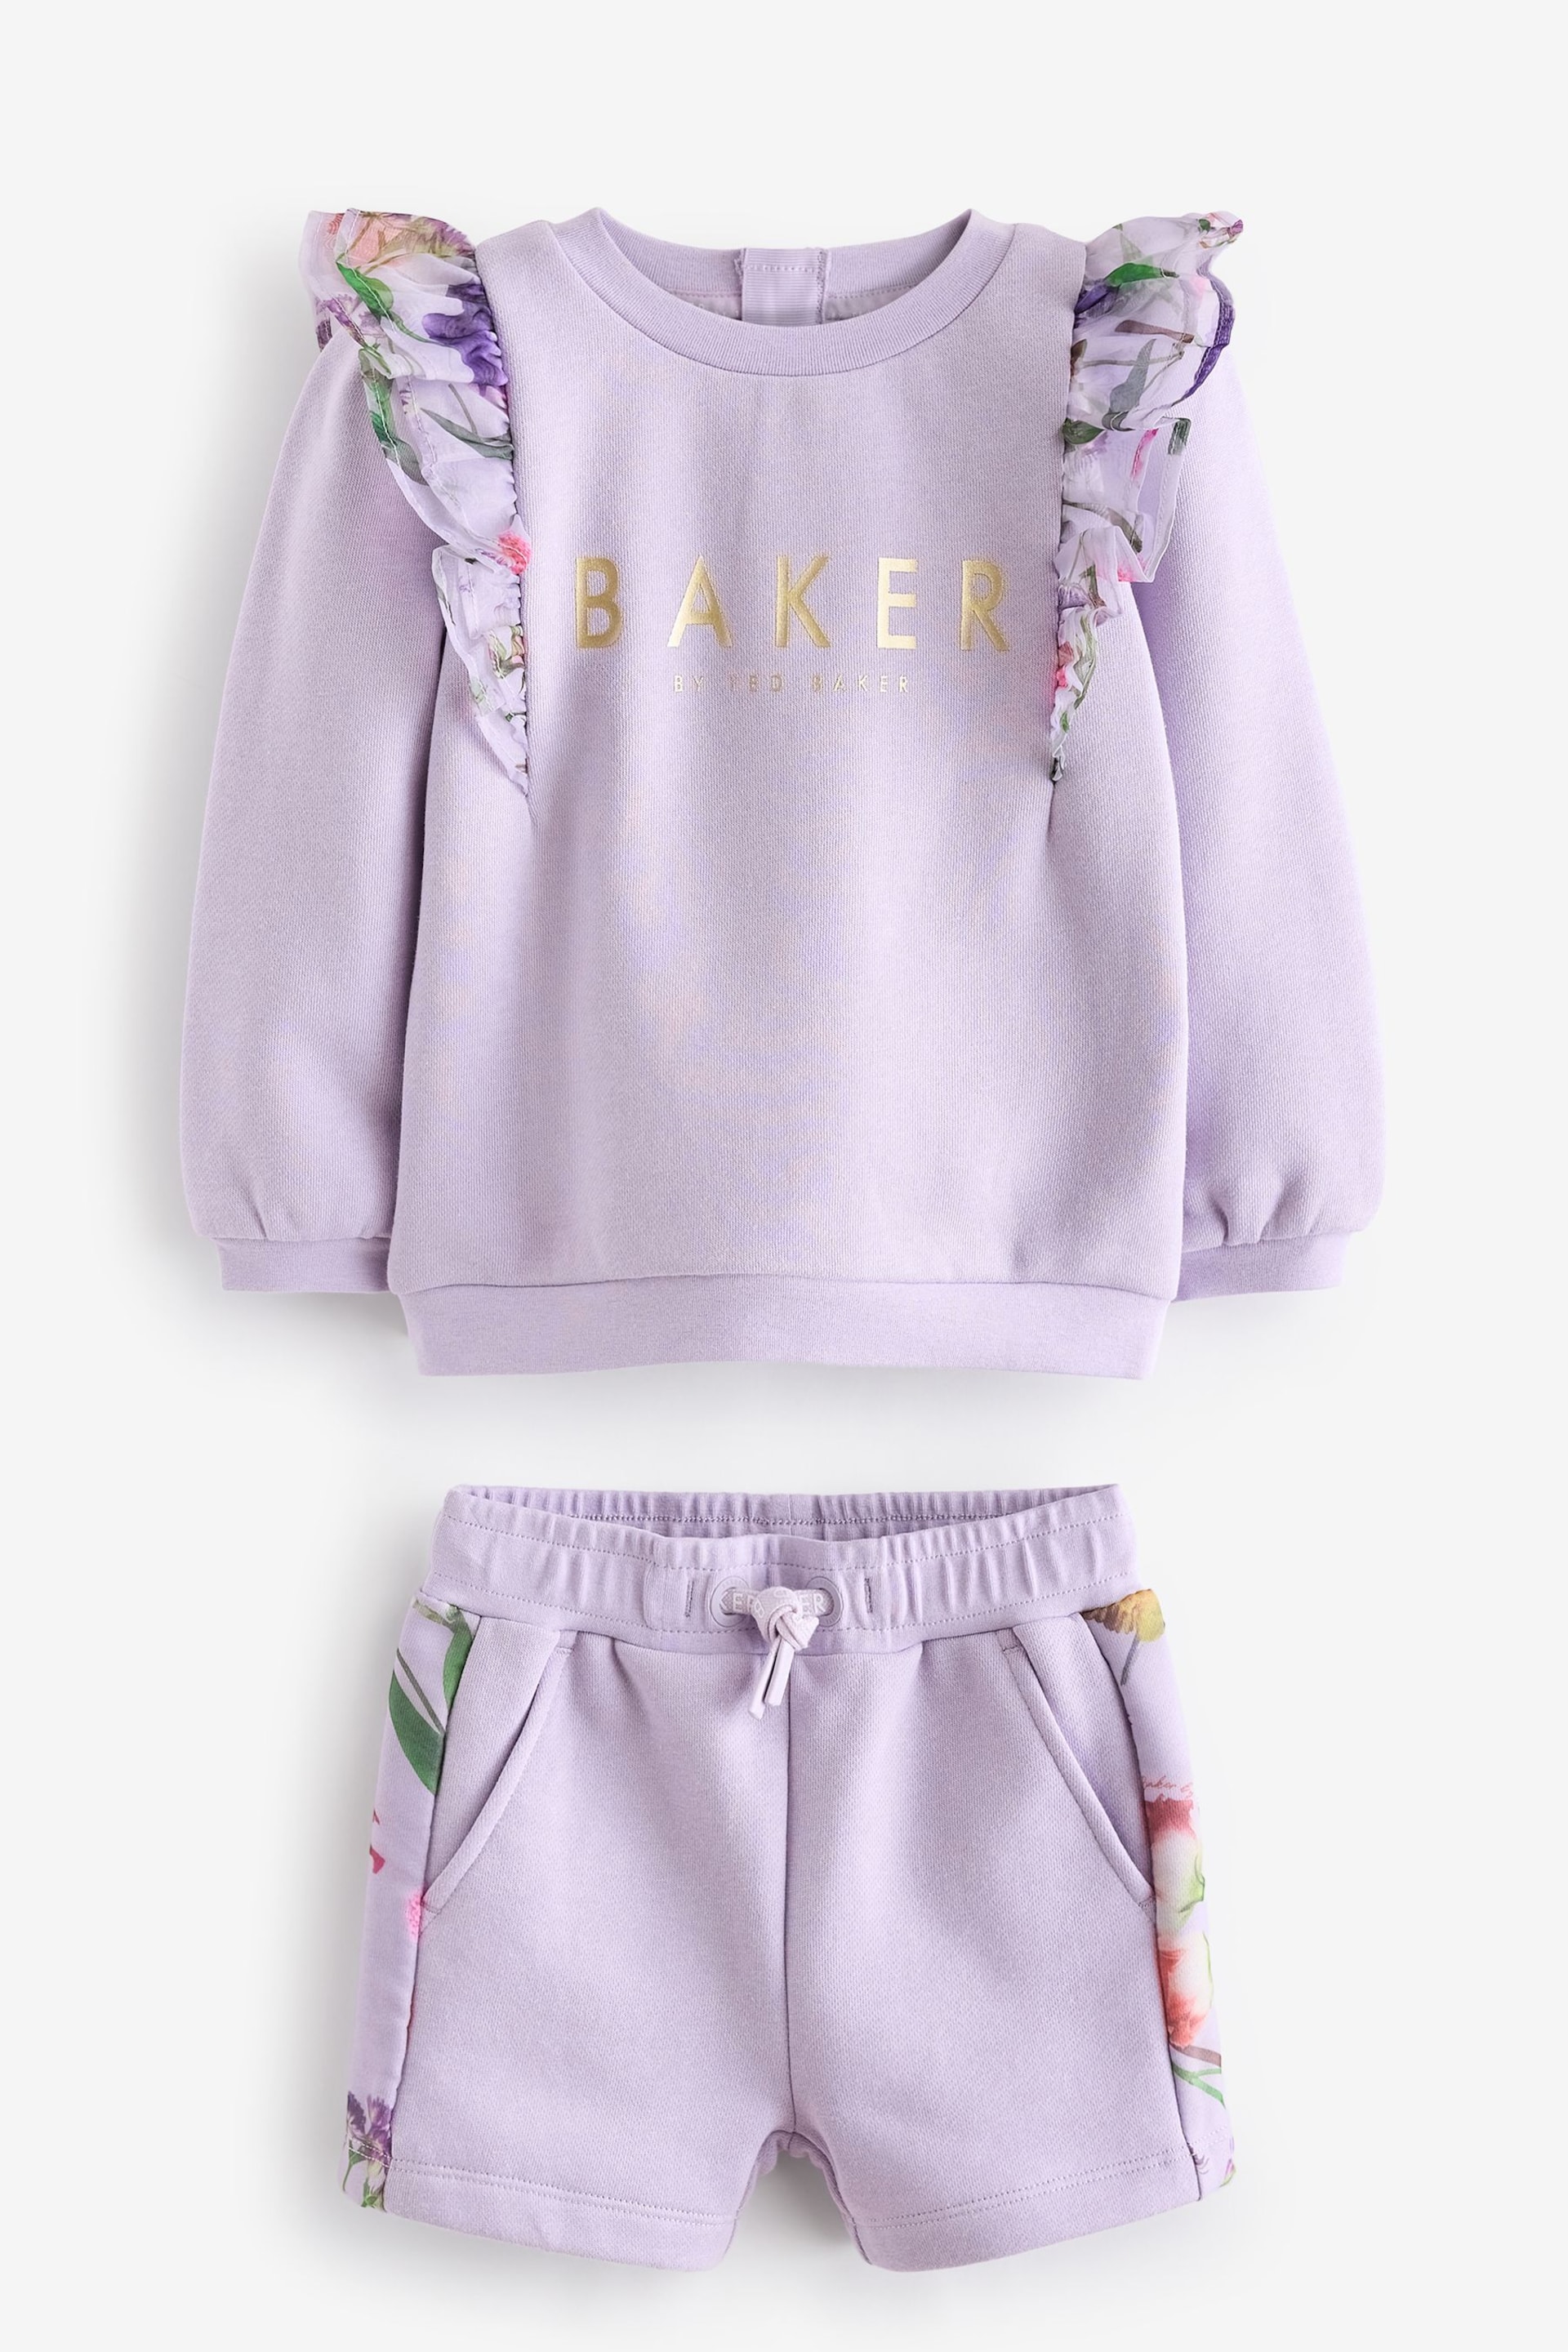 Baker by Ted Baker Organza Sweater And Shorts Set - Image 8 of 12